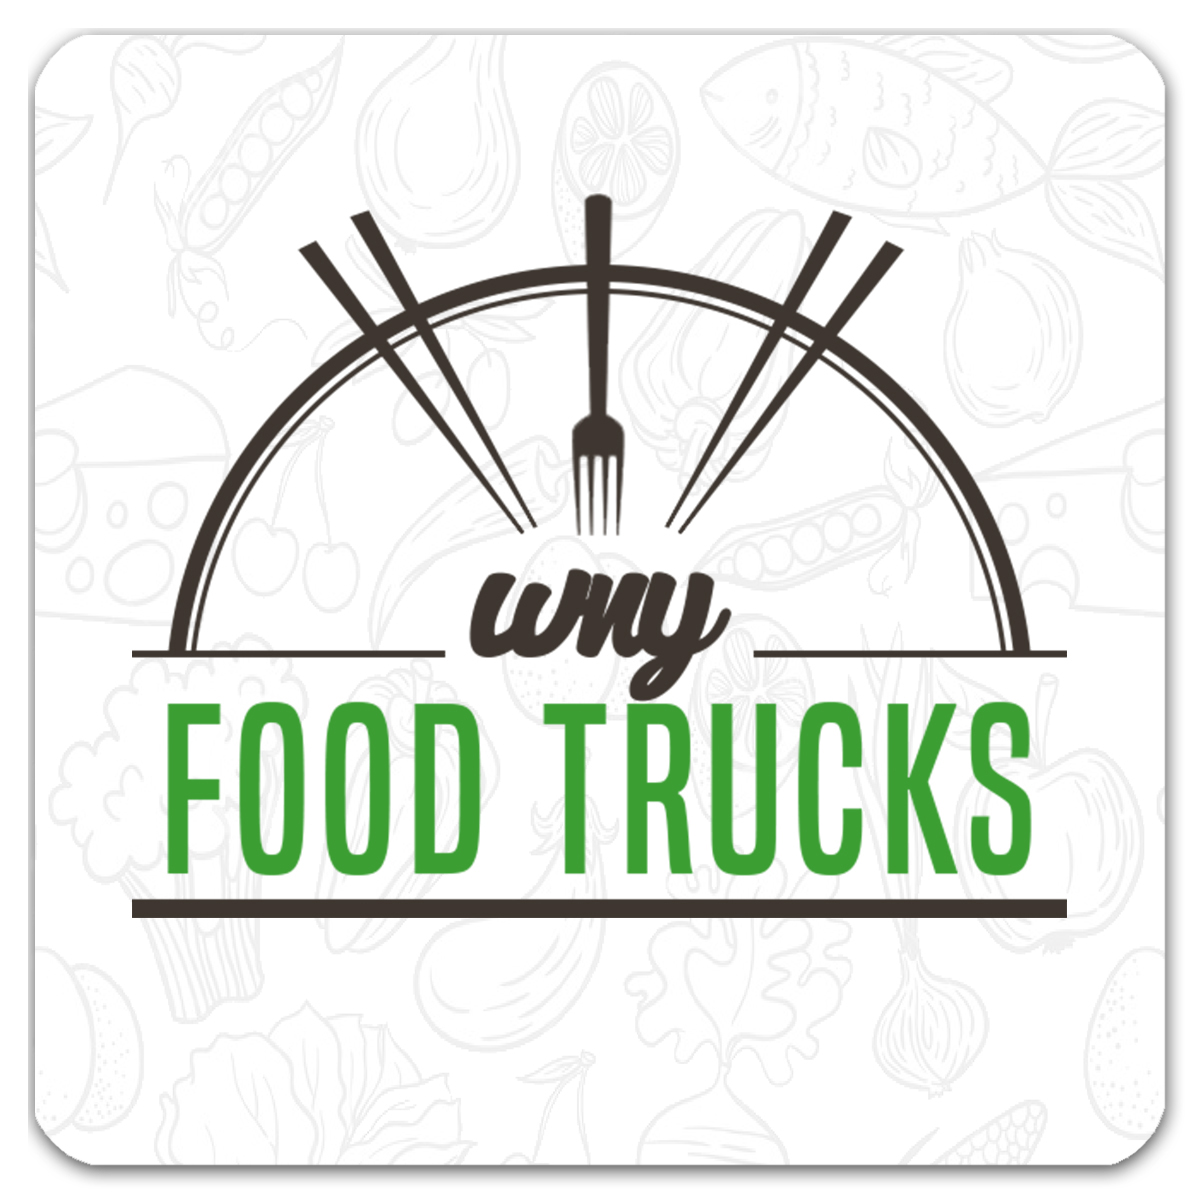 WNY Food Trucks is proud to be a part of Born Buffalo.